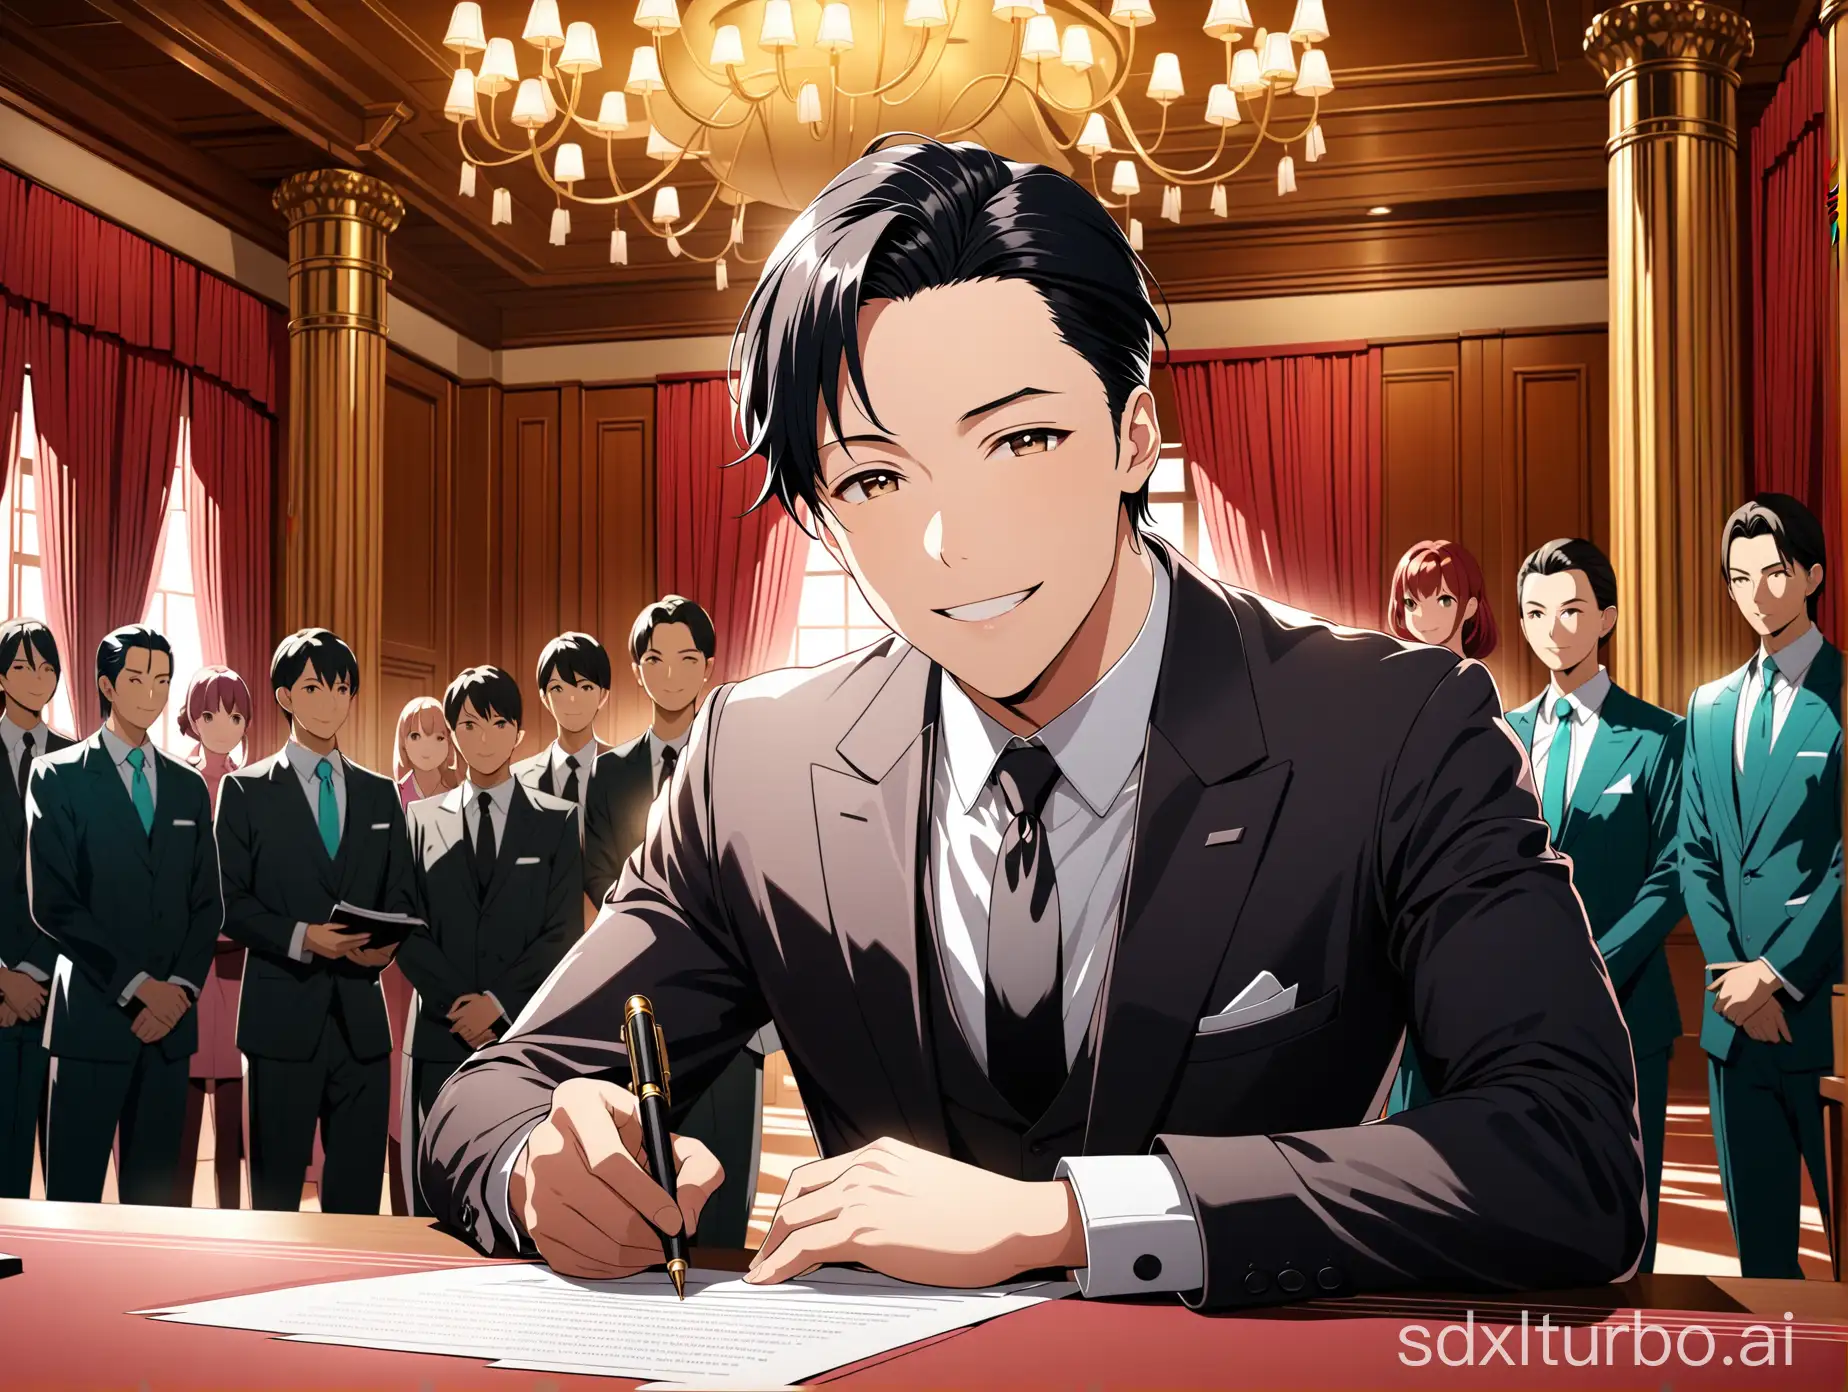 Elegant-Anime-Style-Portrait-Musk-Holding-Contract-with-Confident-Smile